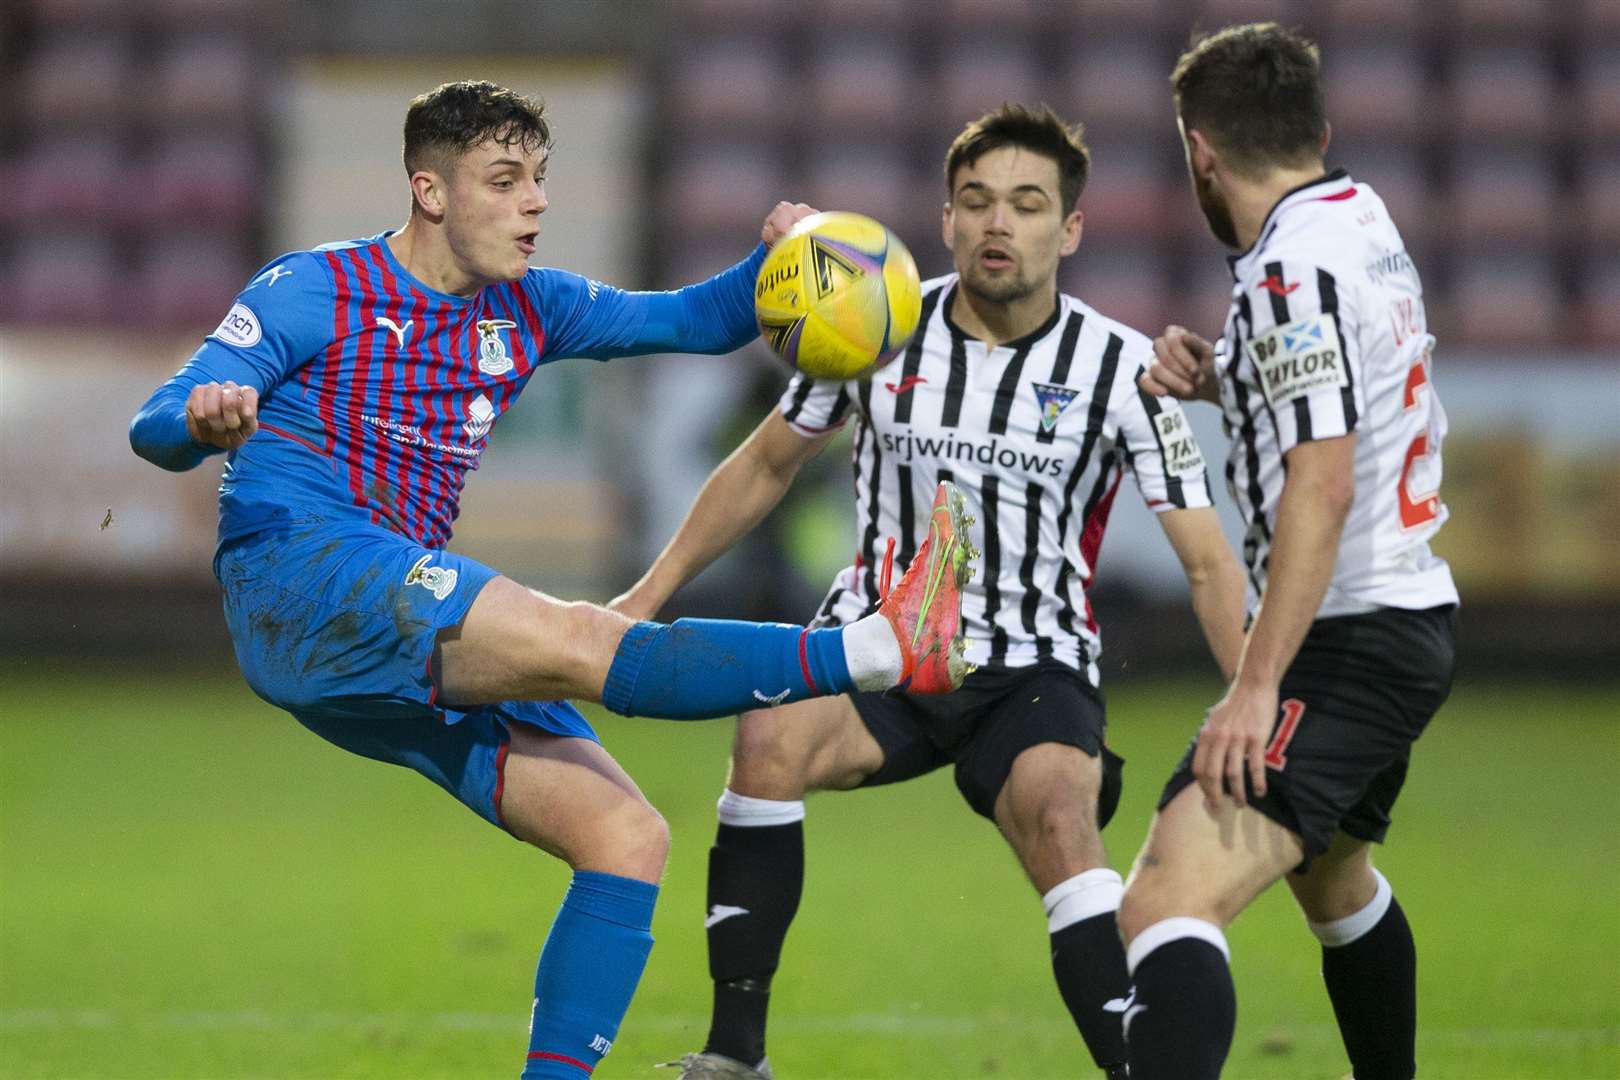 Picture - Craig Brown. Dunfermline(1) v Inverness CT(1). 22.01.22. ICT’s Cameron Harper clears his lines.